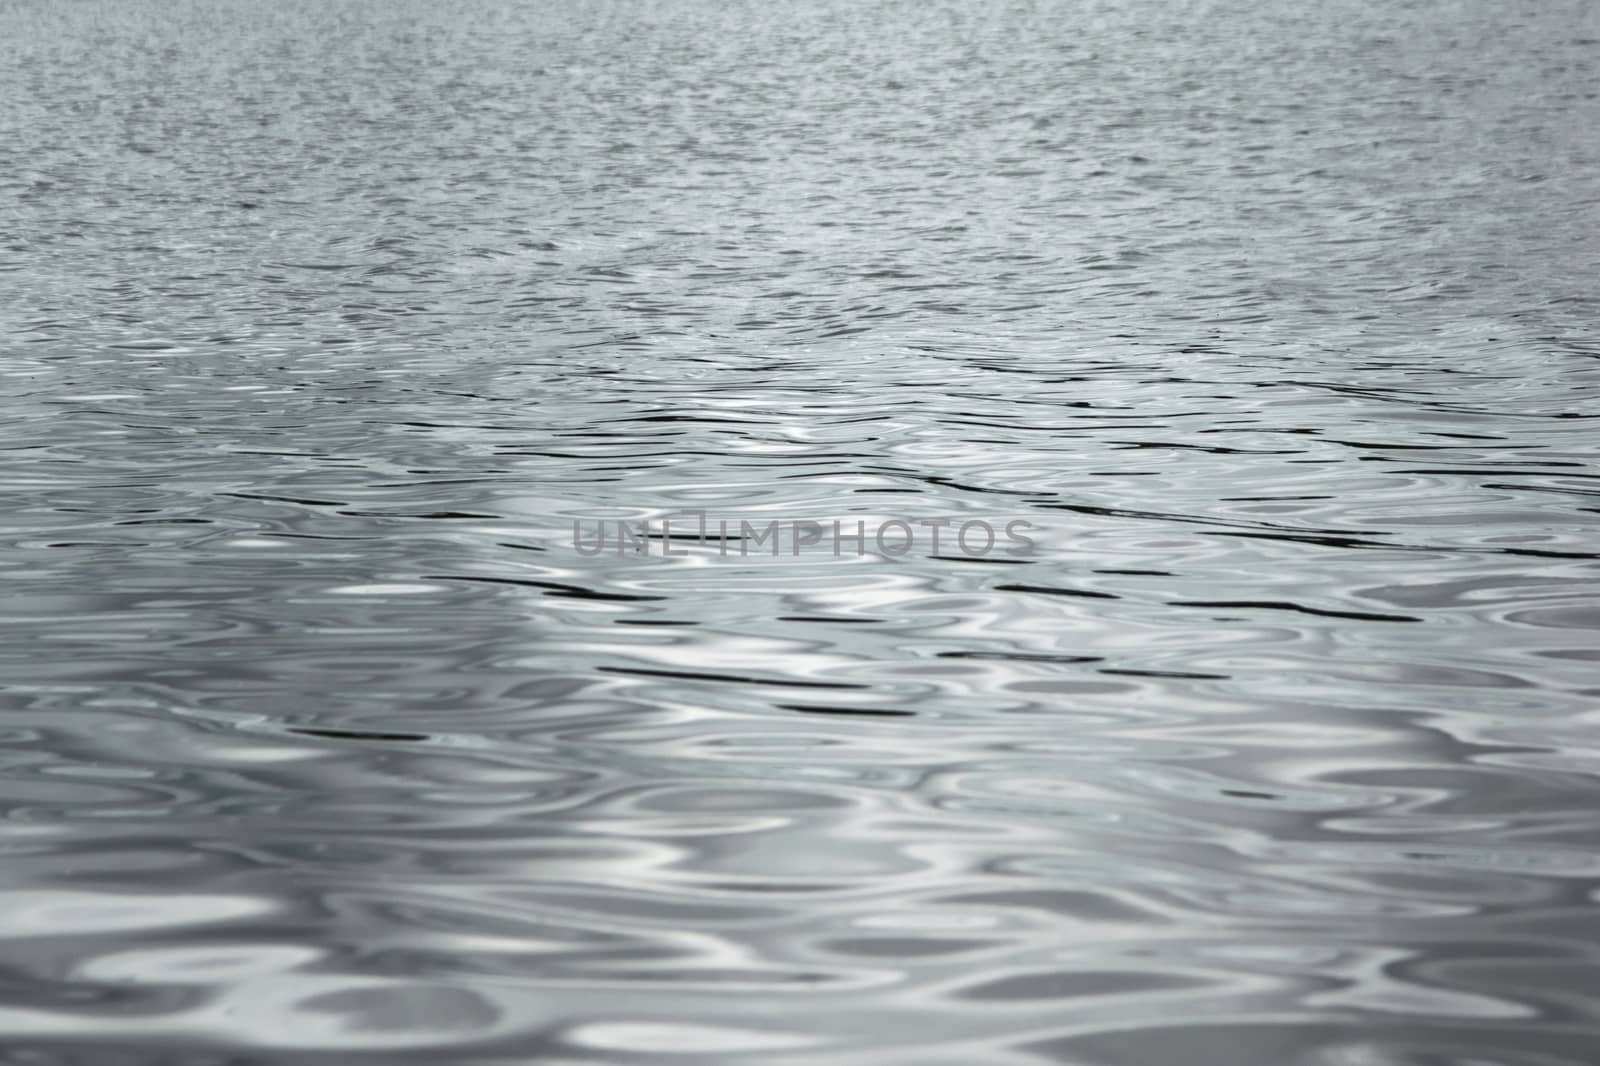 Silver reflections on the waters of a lake. Full frame texture detail.